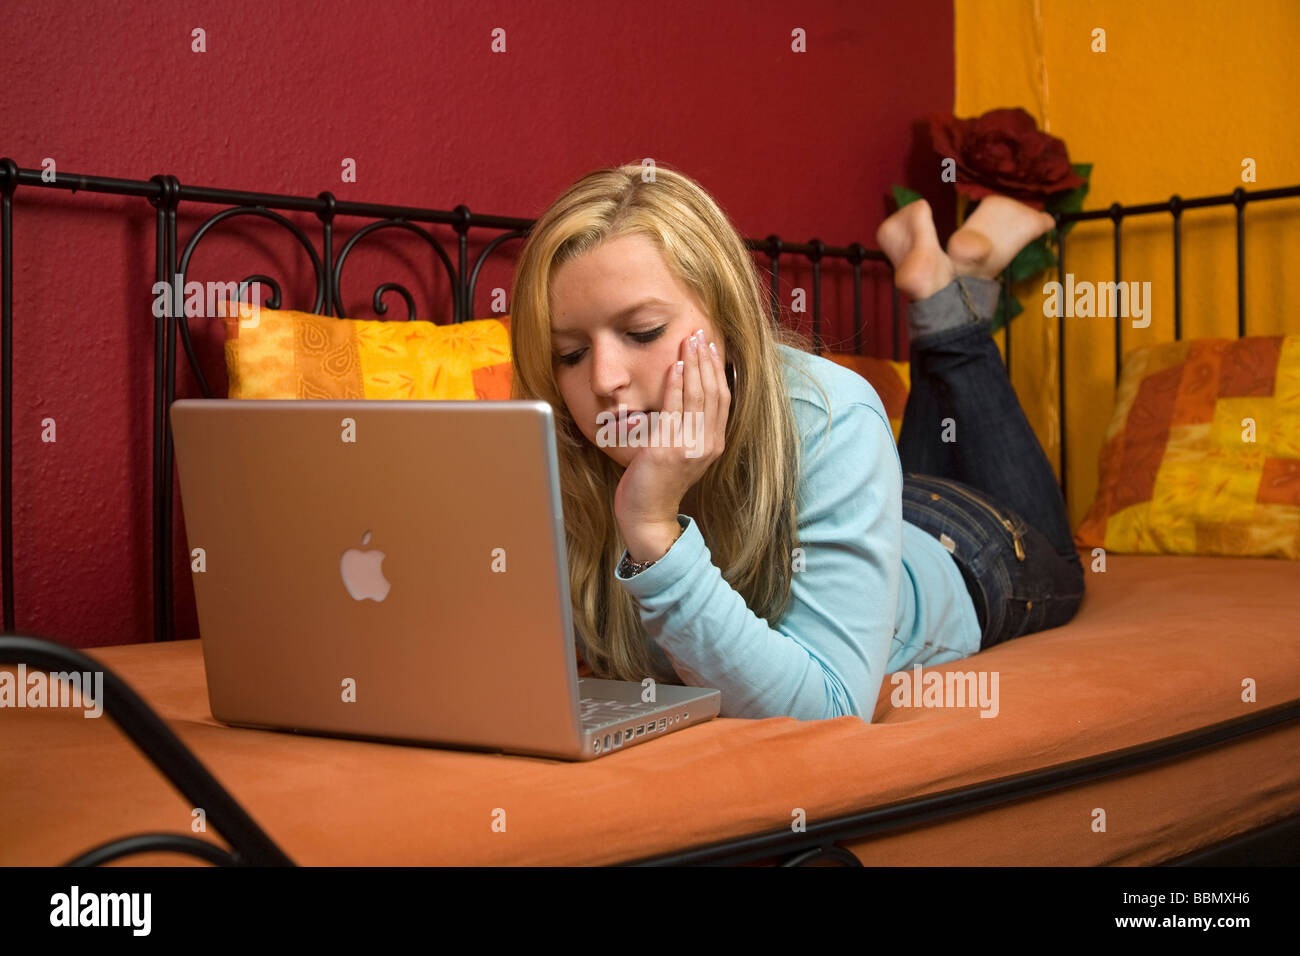 Young woman lying on a bed working on a laptop Stock Photo